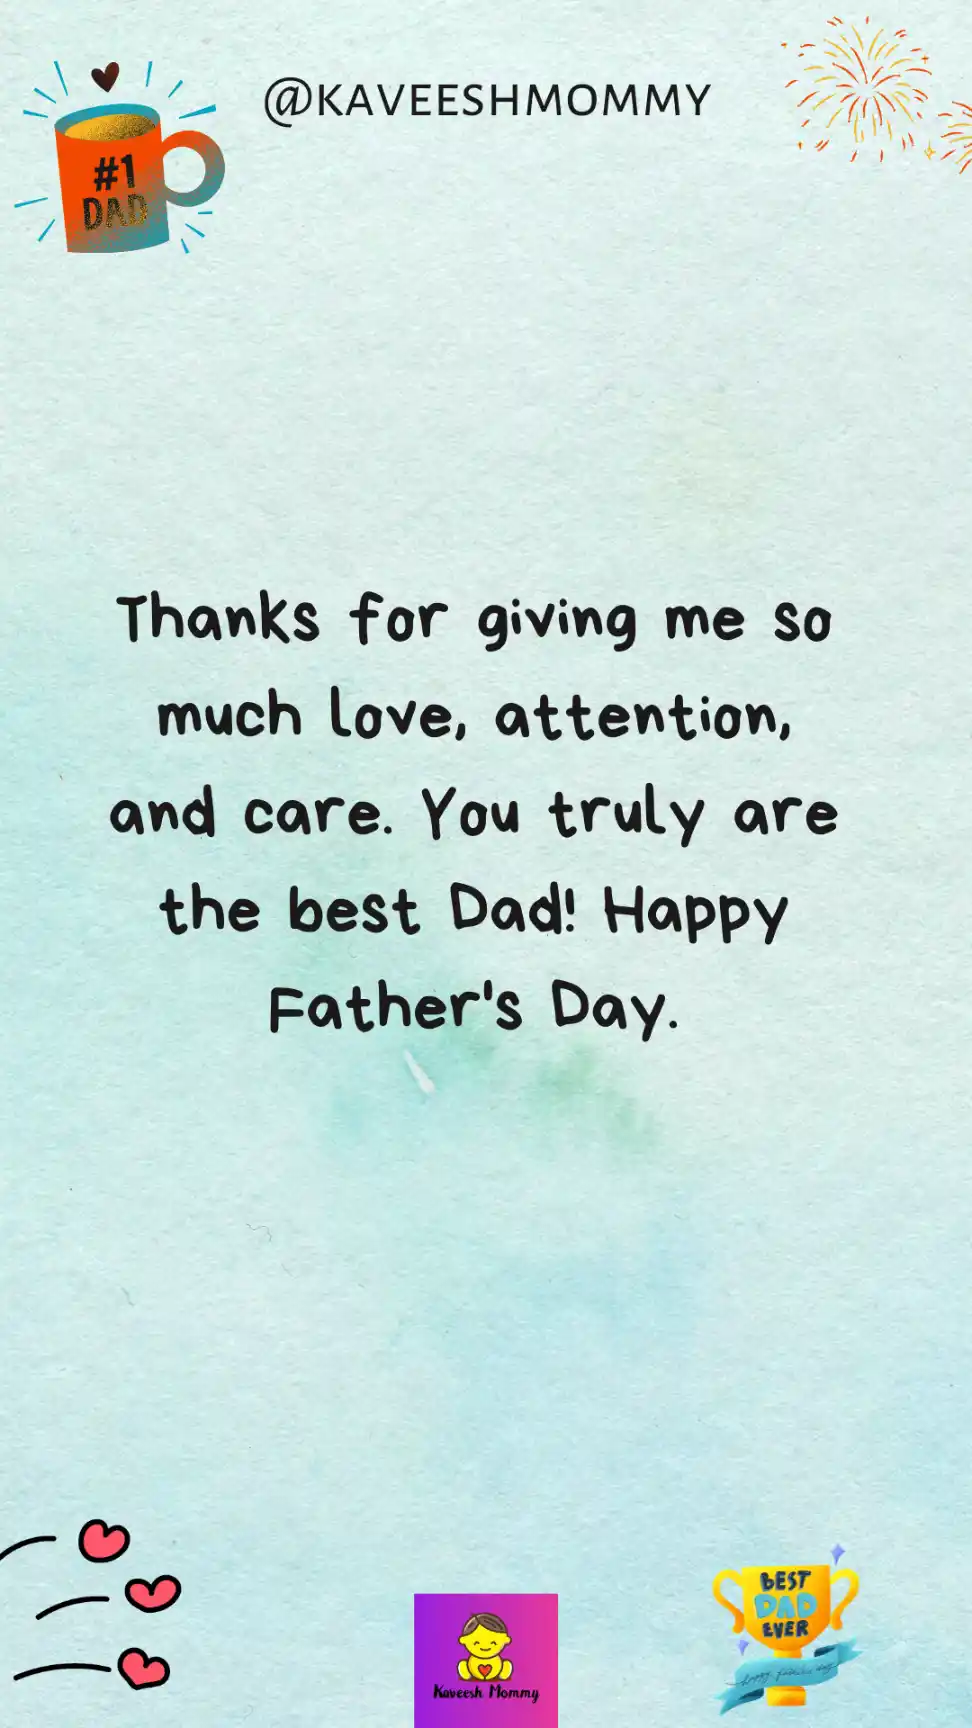 happy fathers day wishes from wife-Thanks for giving me so much love, attention, and care. You truly are the best Dad! Happy Father's Day.